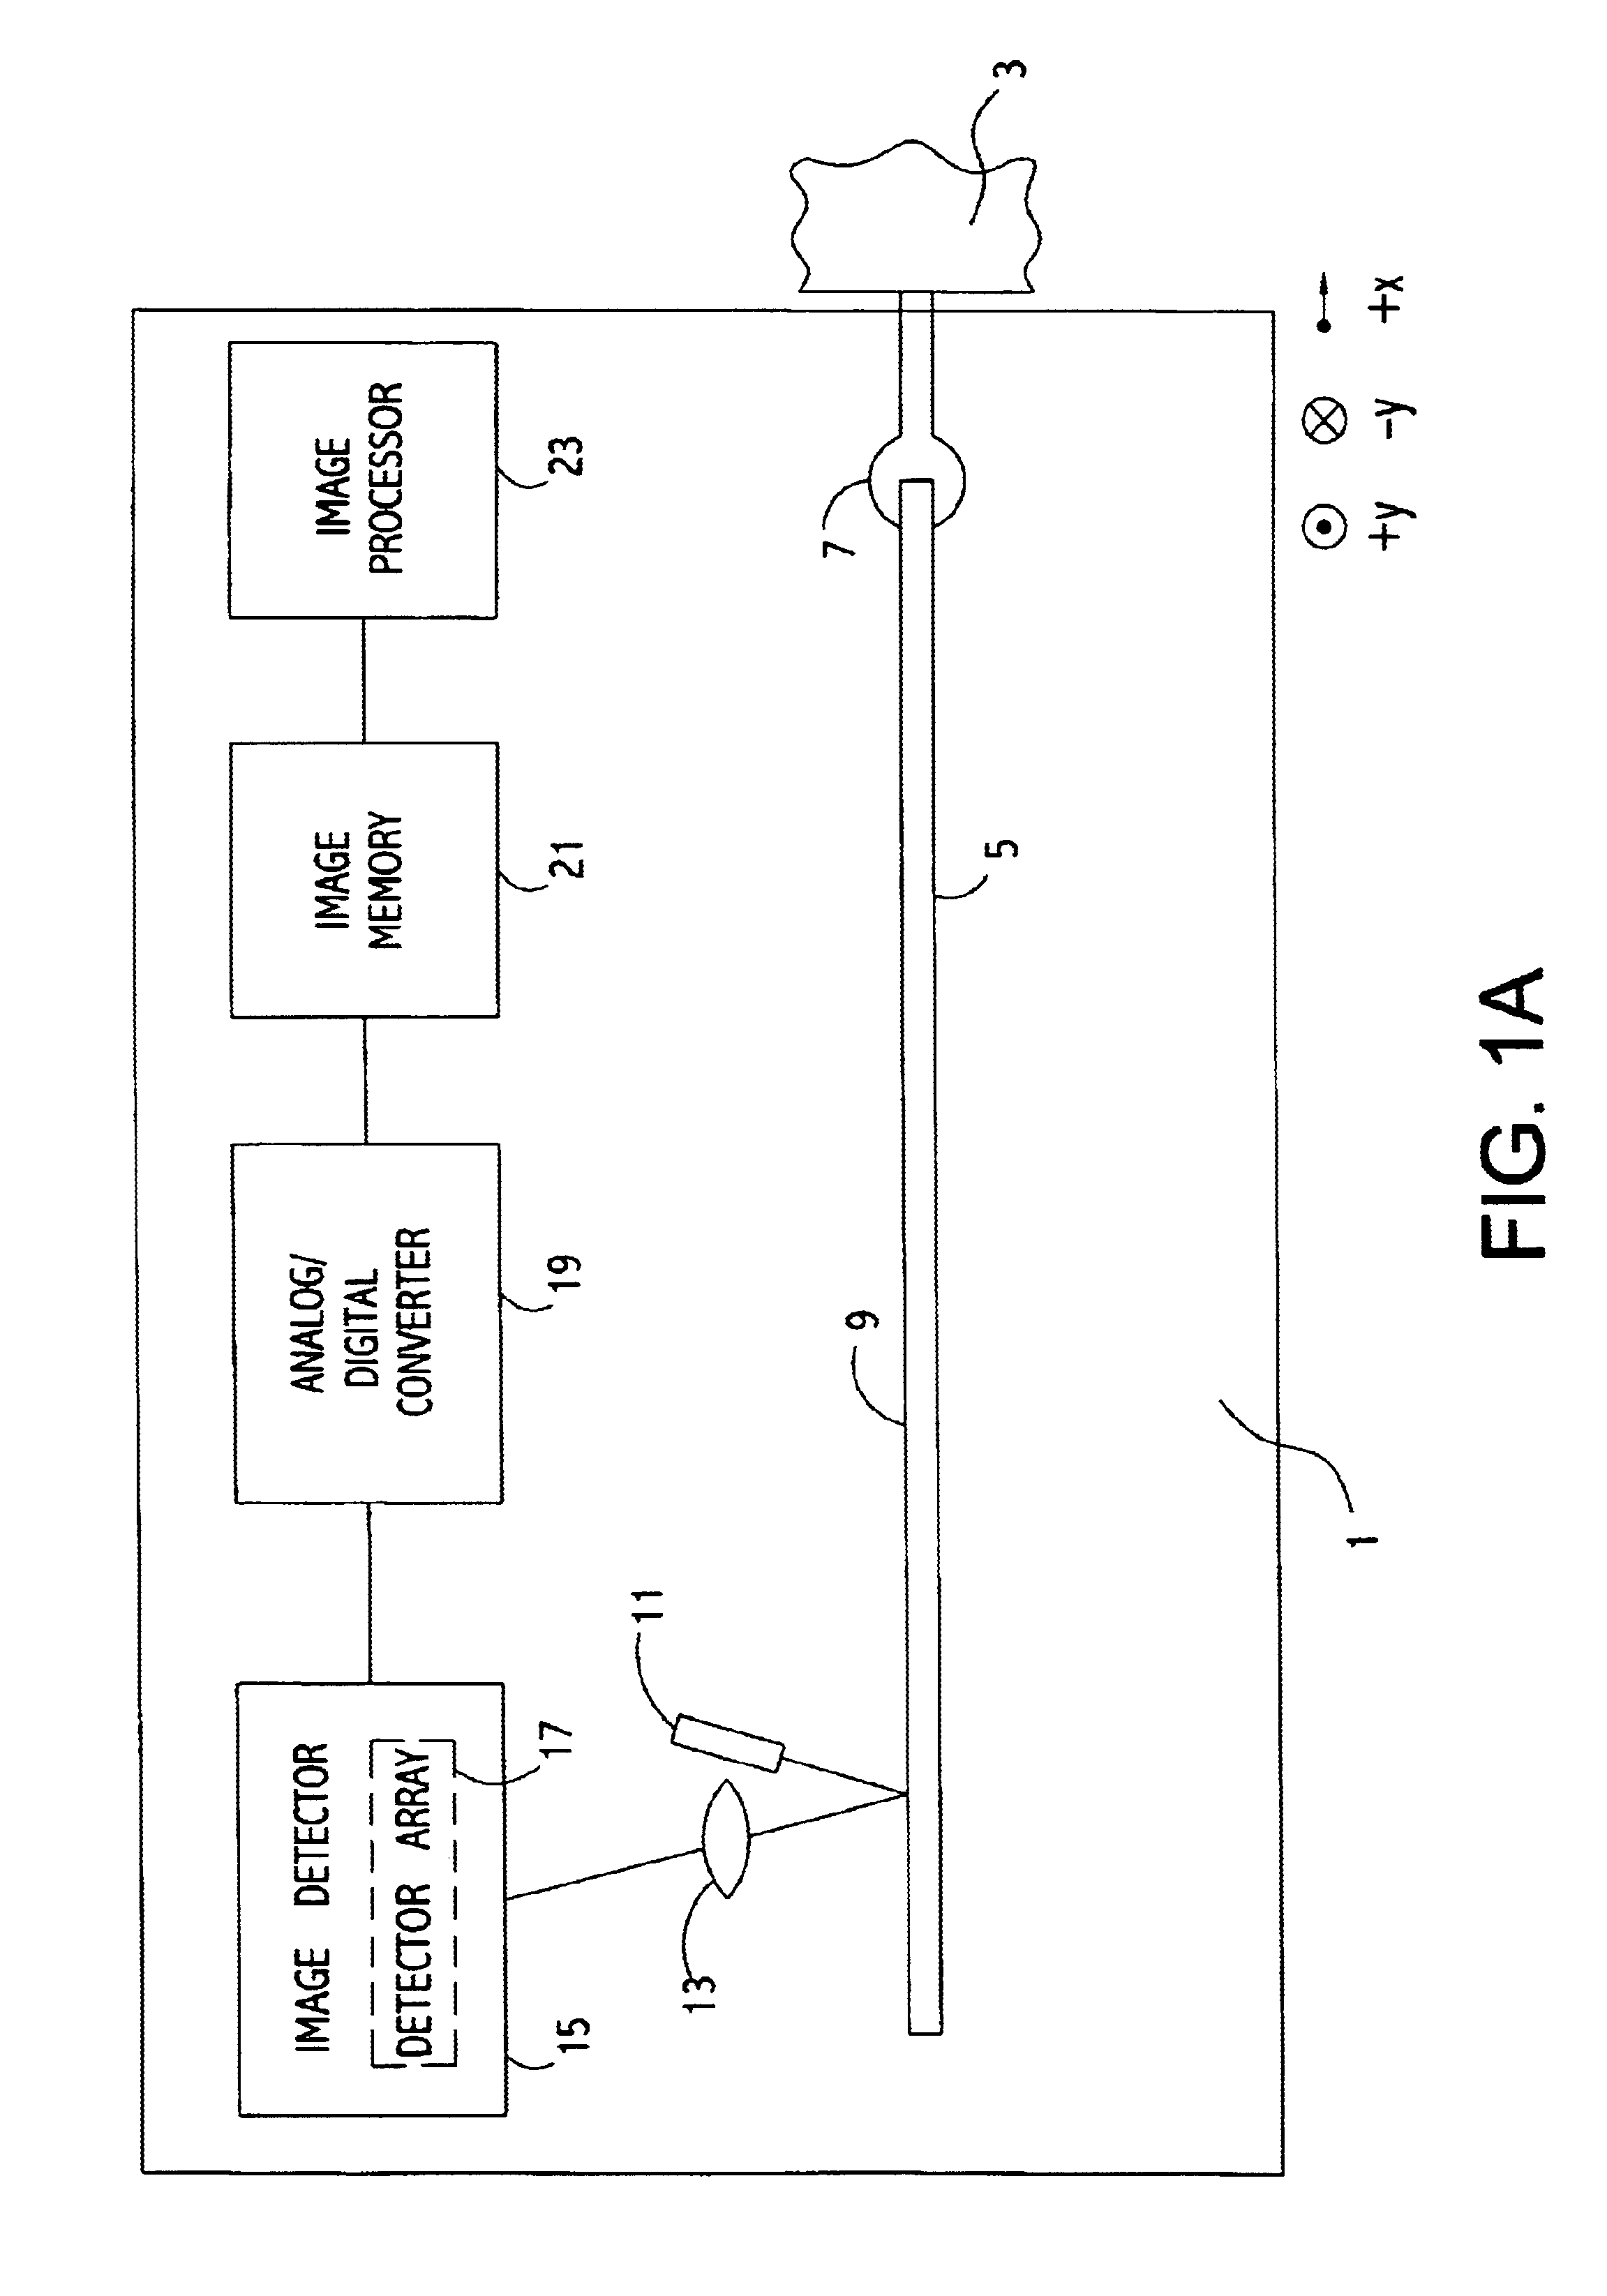 Method and apparatus for two-dimensional absolute optical encoding